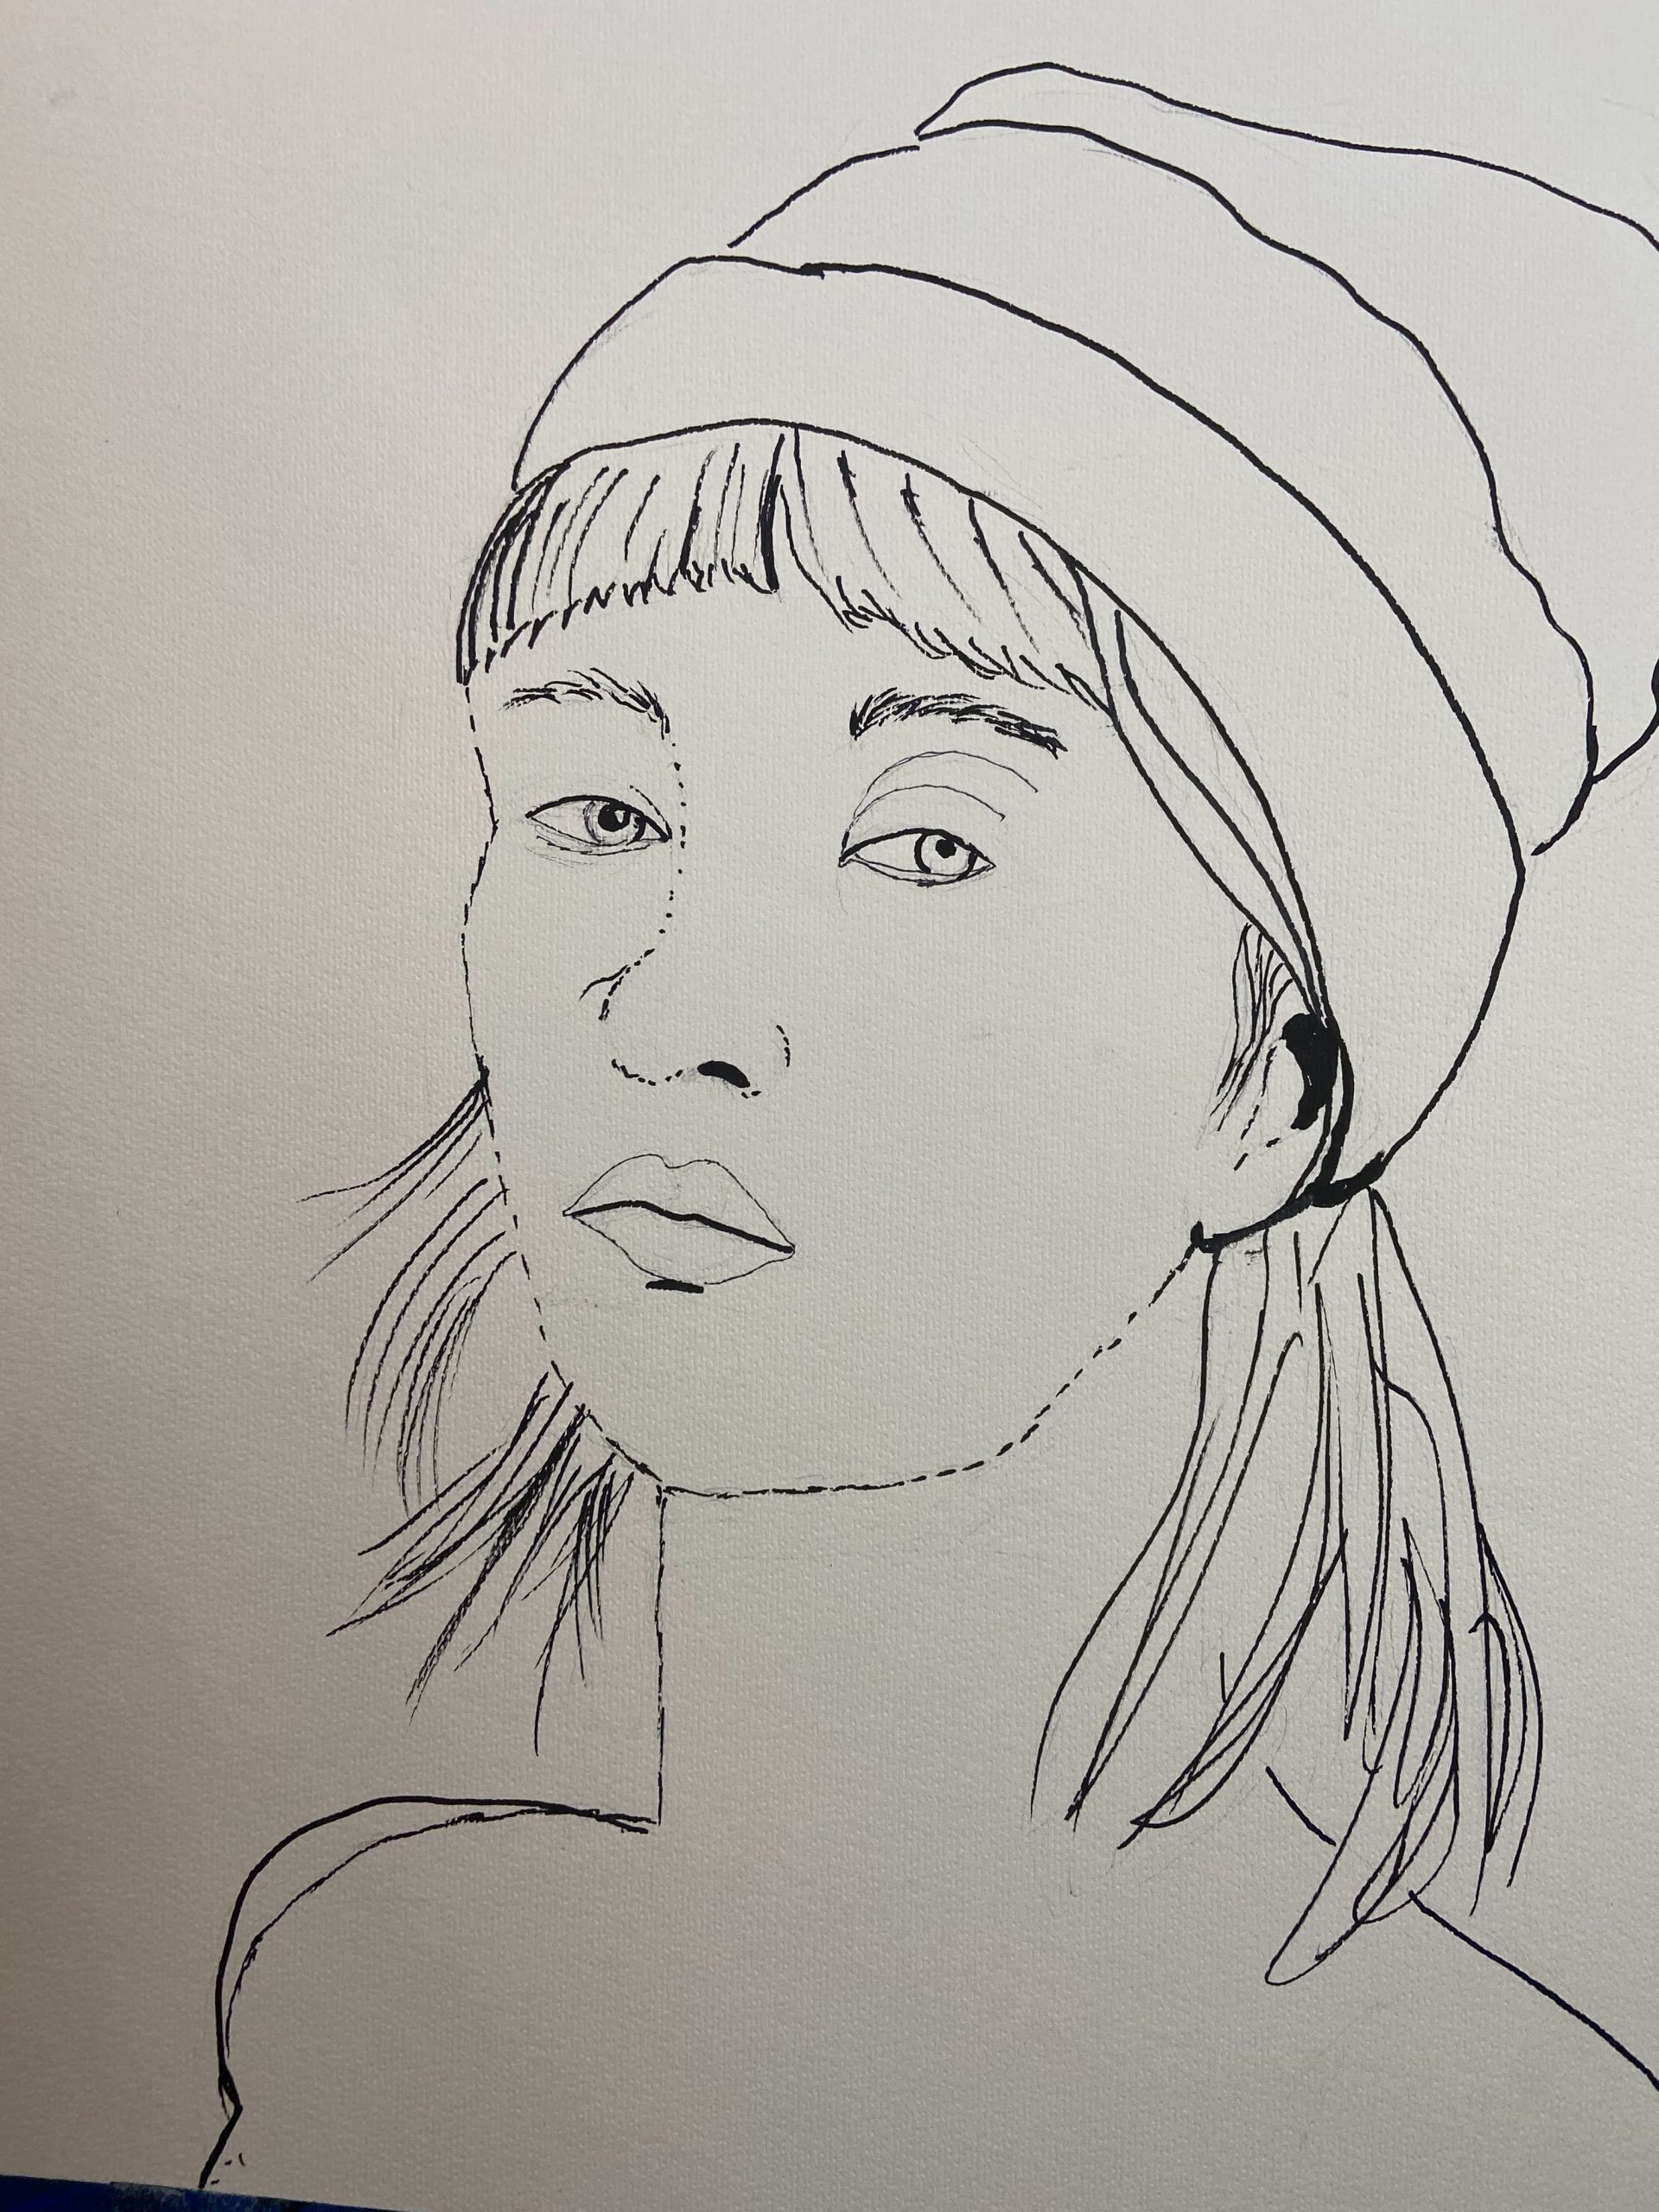 Pen sketch of a sulky girl with a knit hat